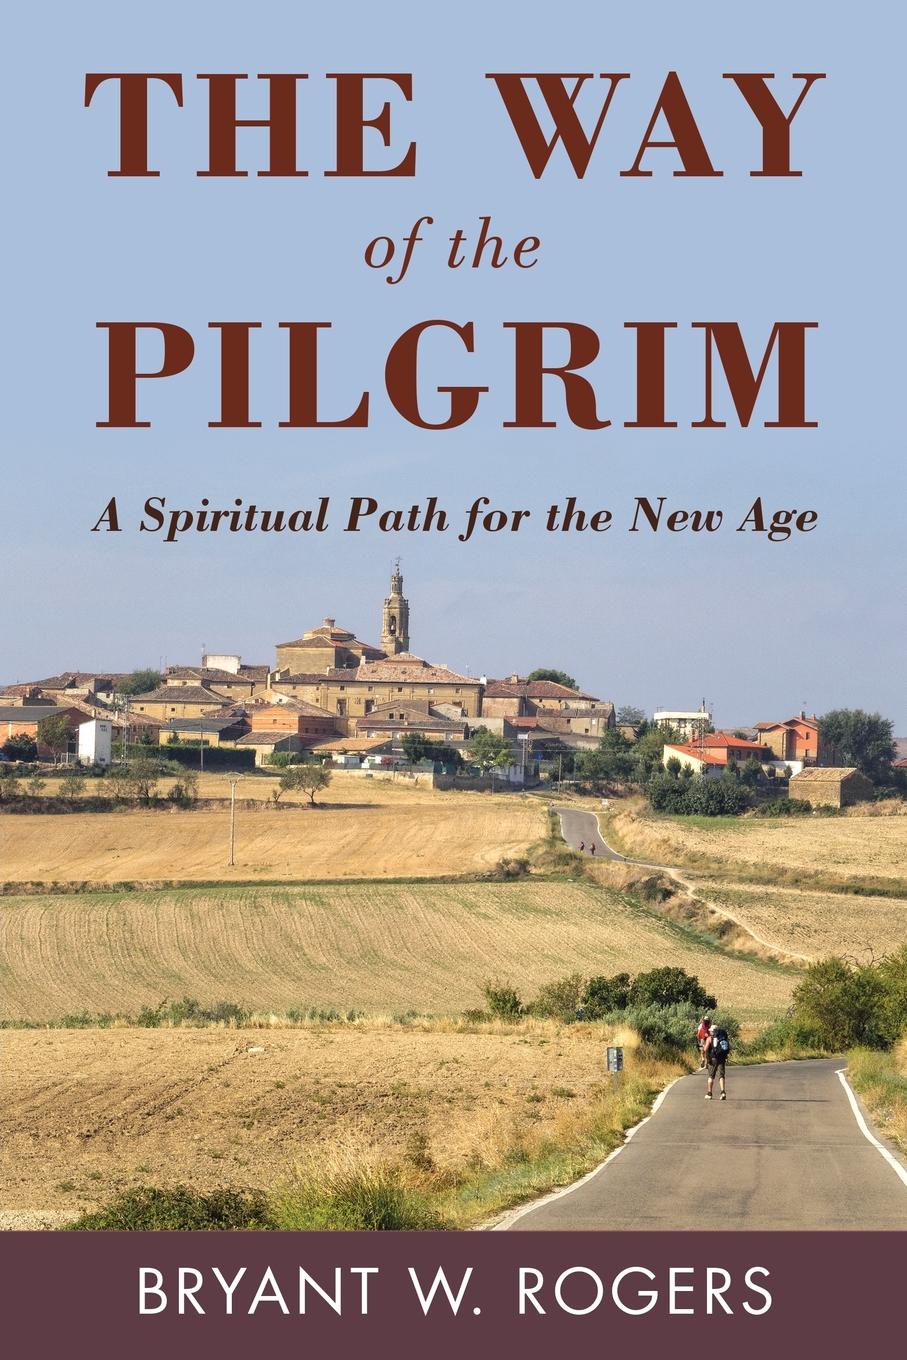 The Way of the Pilgrim. A Spiritual Path for the New Age